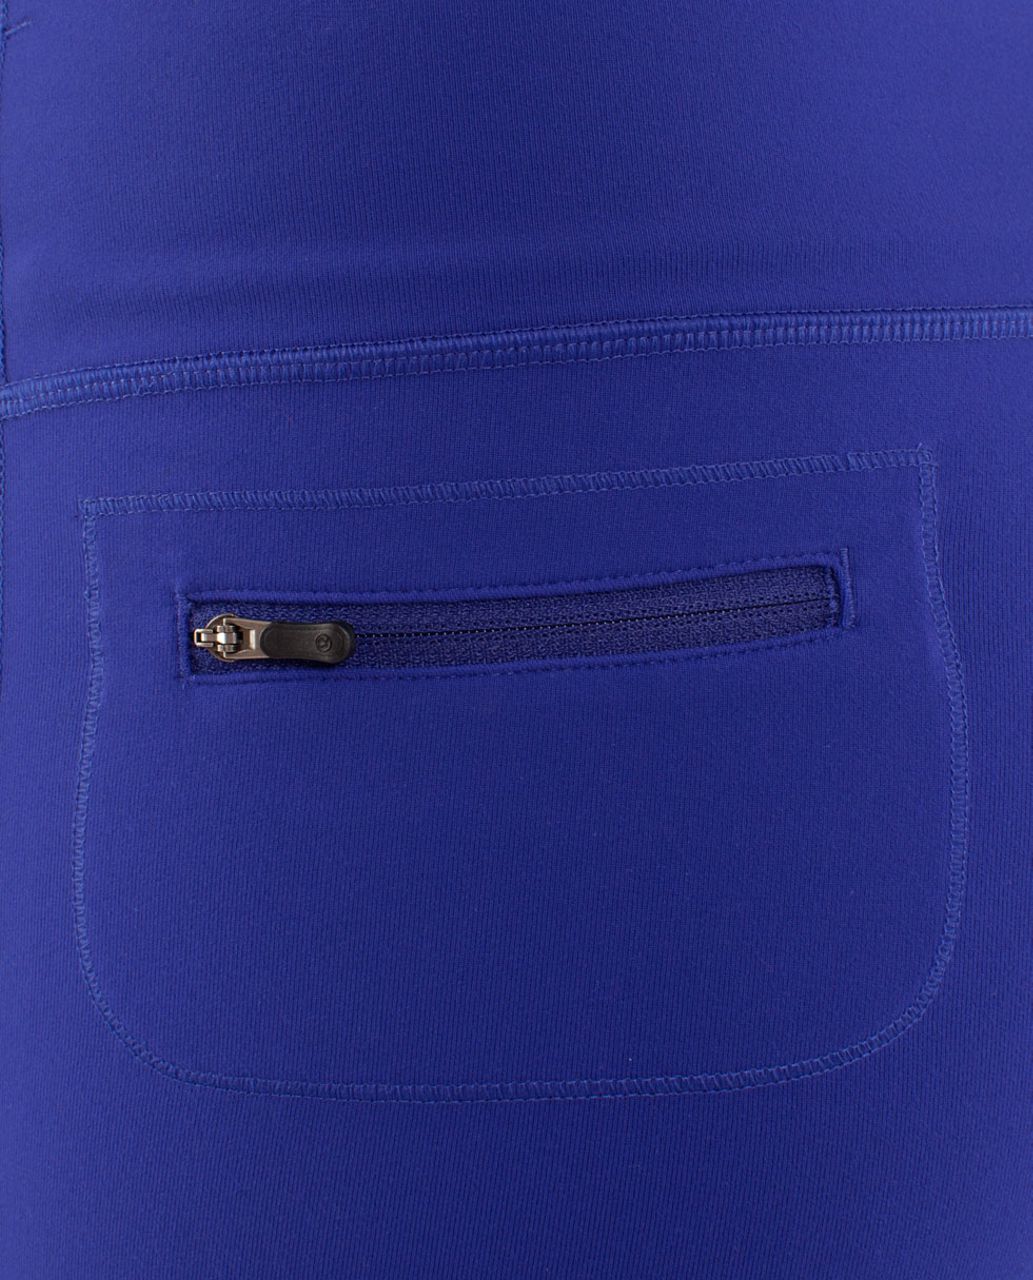 Lululemon Relaxed Fit Pant - Pigment Blue